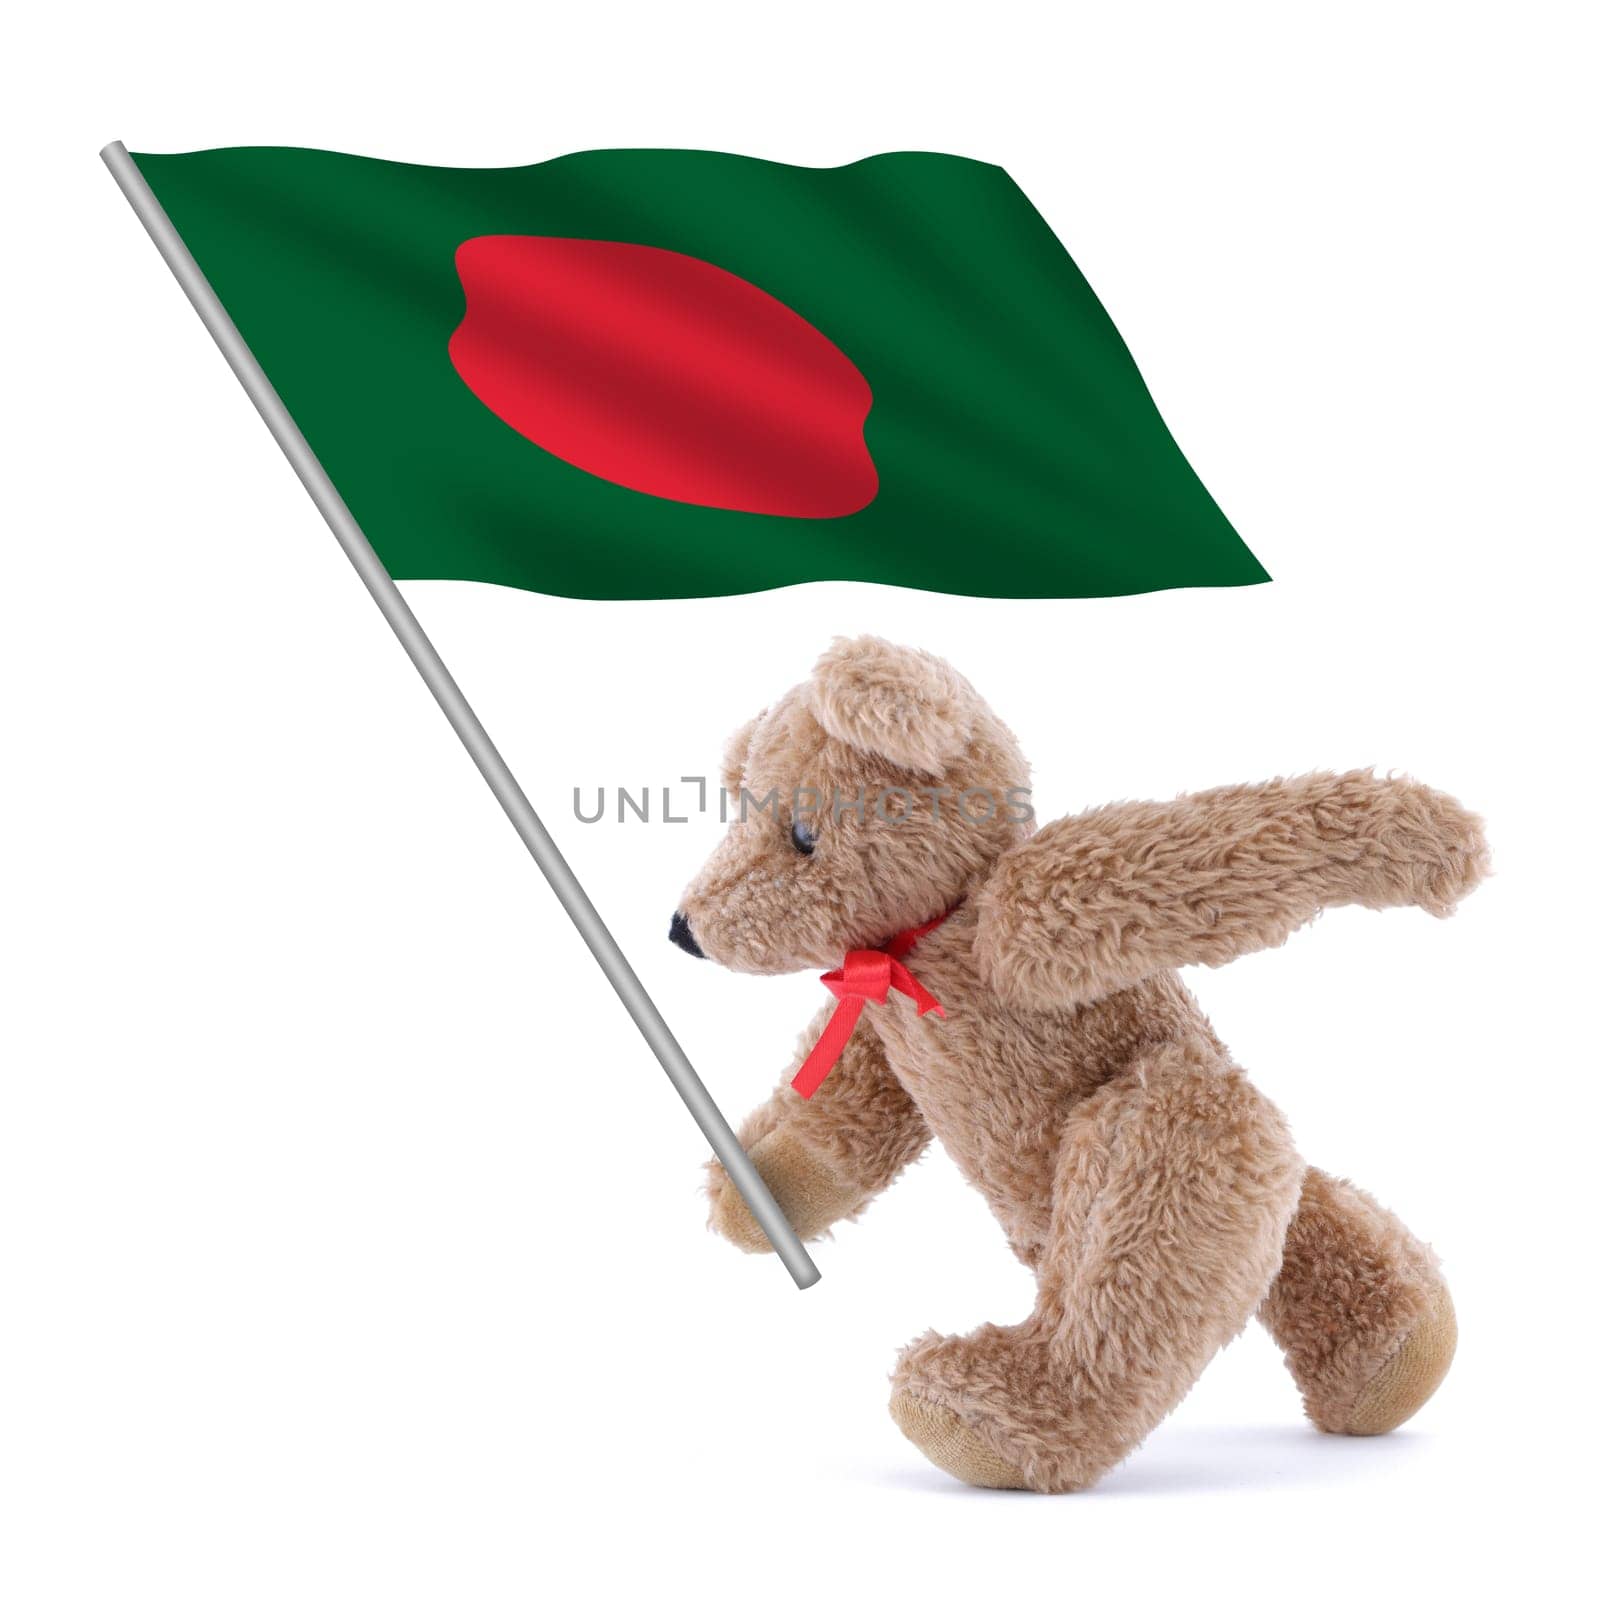 Bangladesh flag being carried by a cute teddy bear by VivacityImages